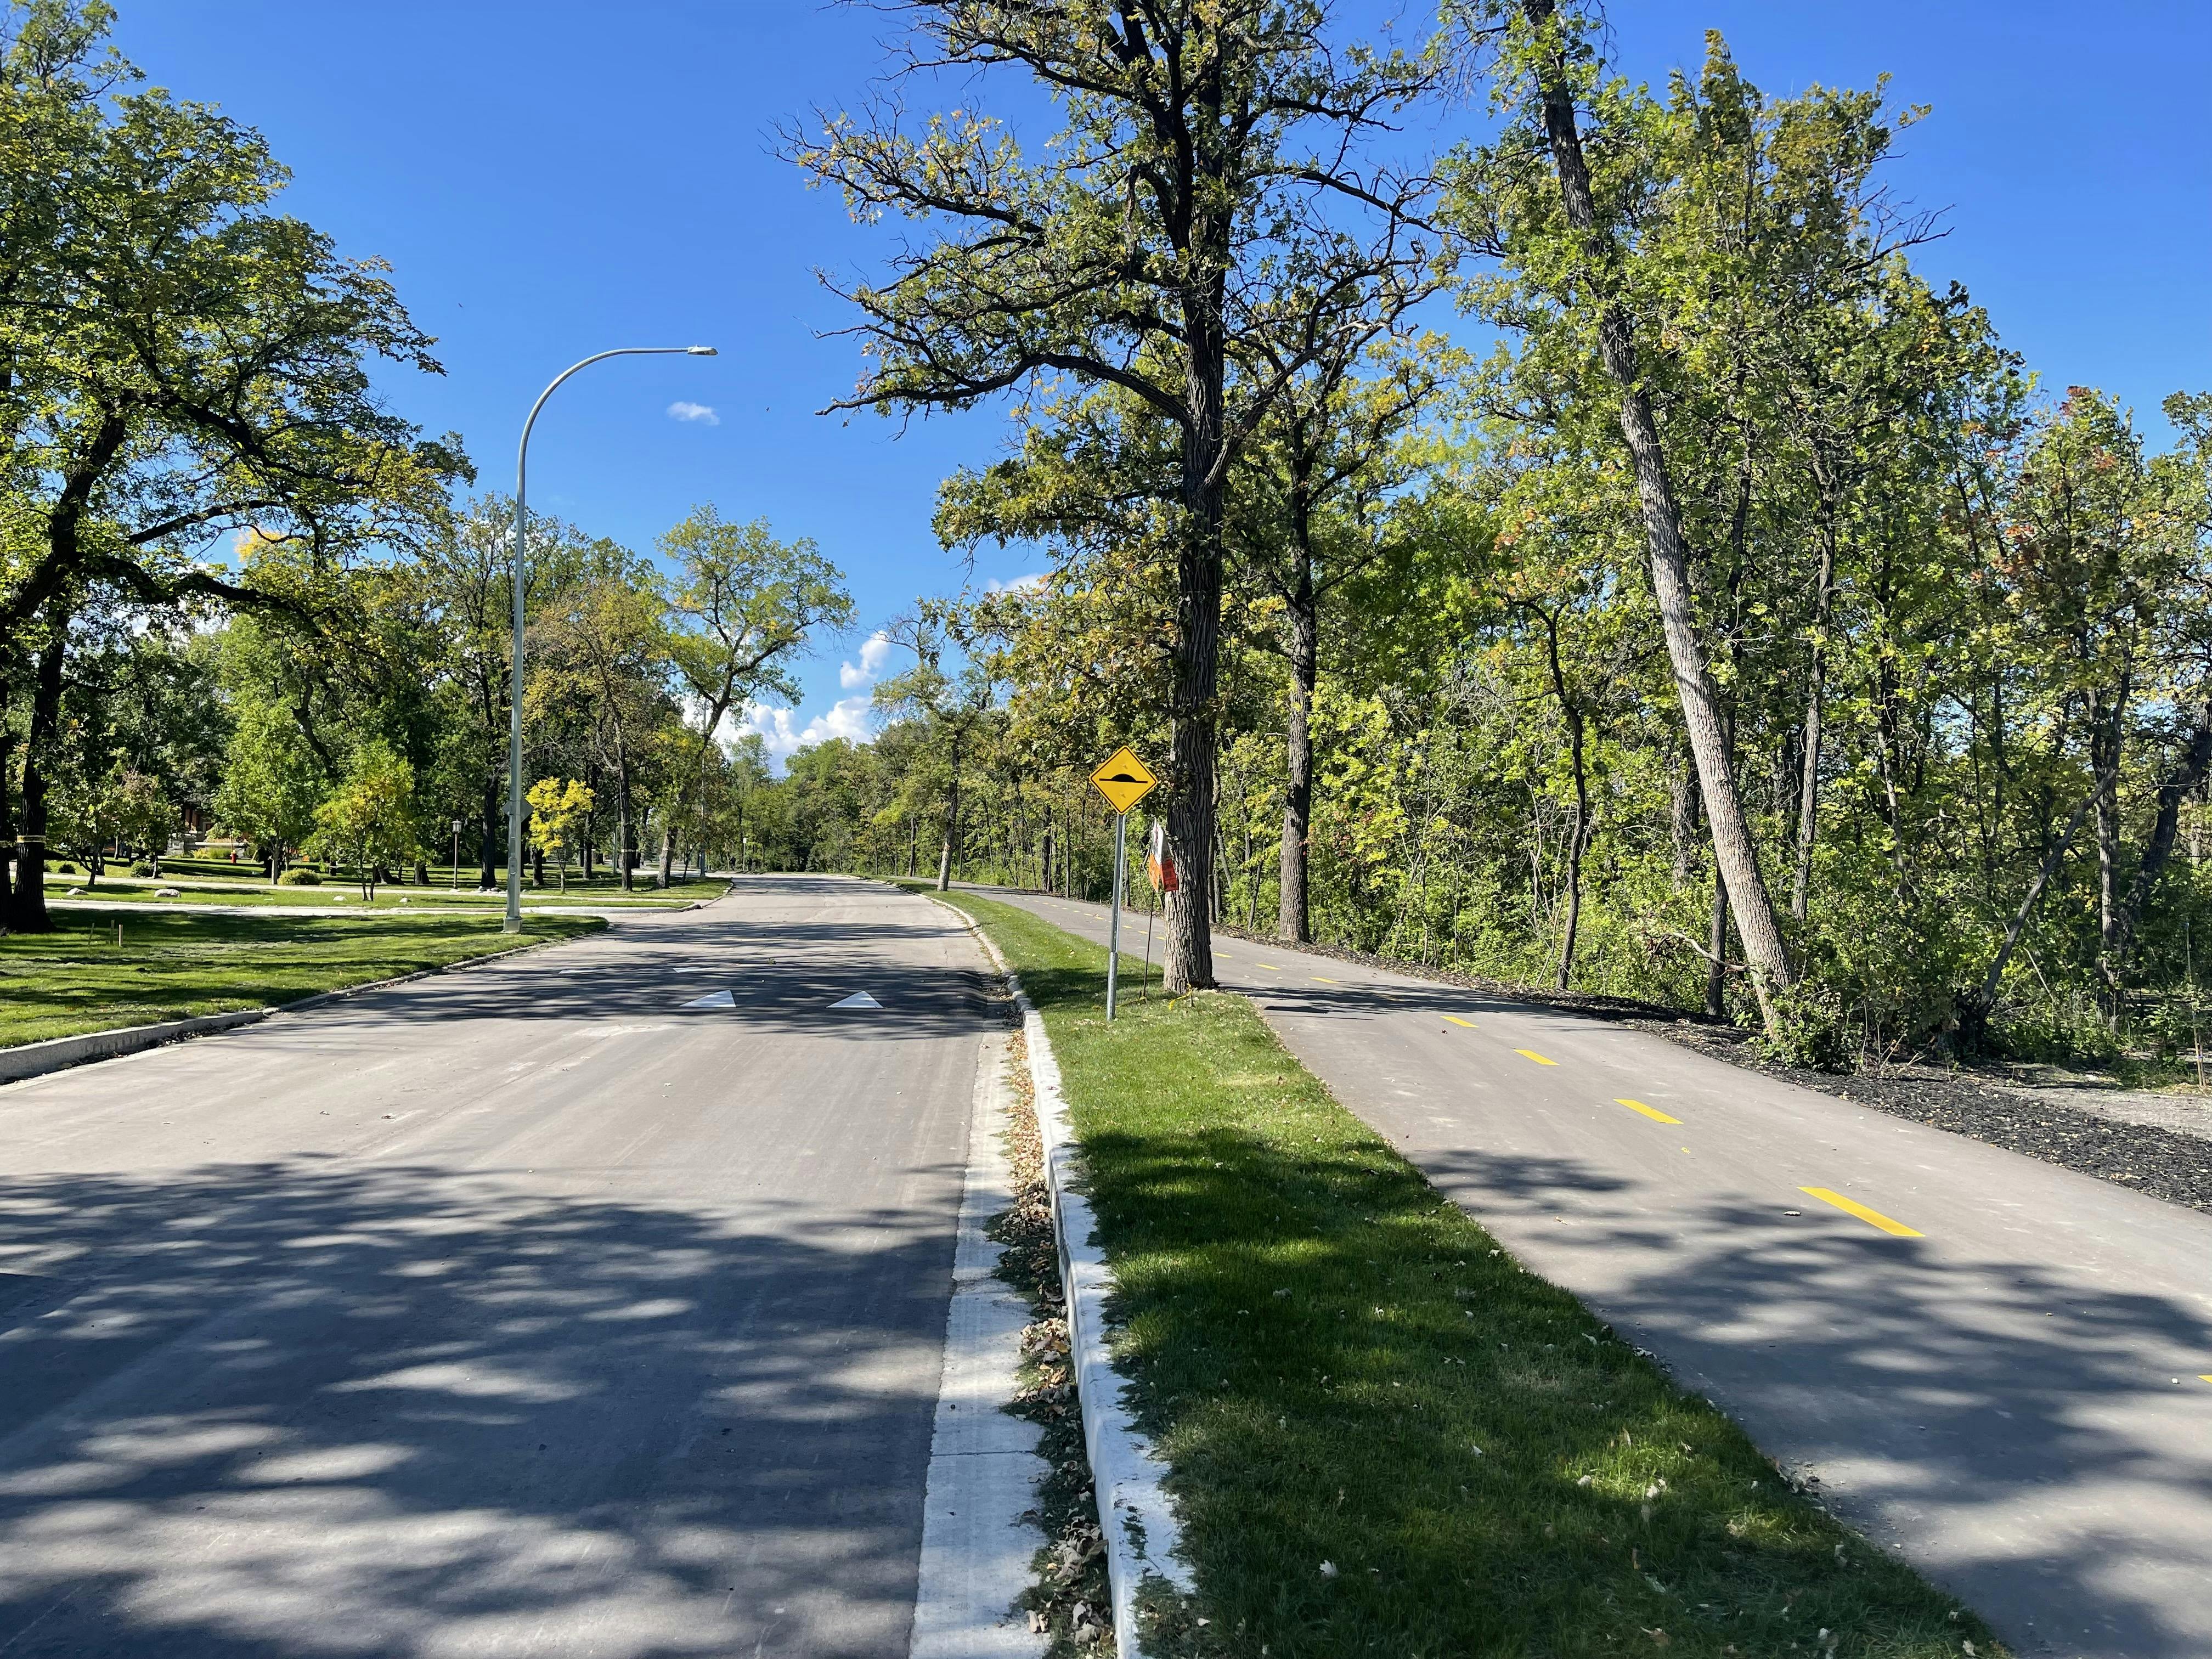 Roadway and path works complete - September 2021